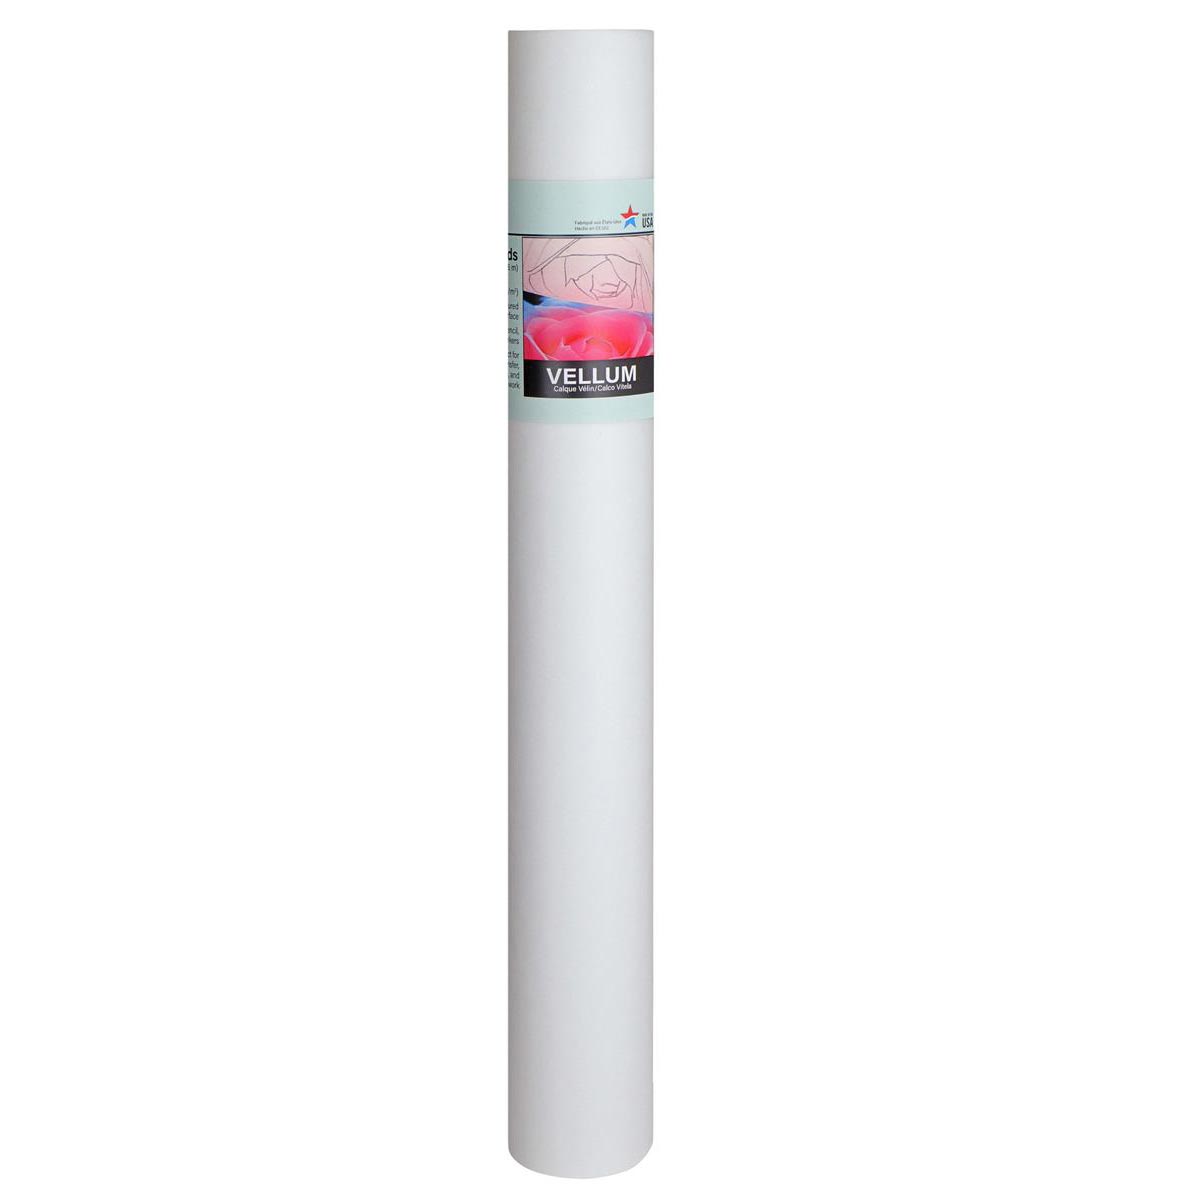 Tracing Vellum Roll by Pro Art - 18-in x 5 yards 37lb.